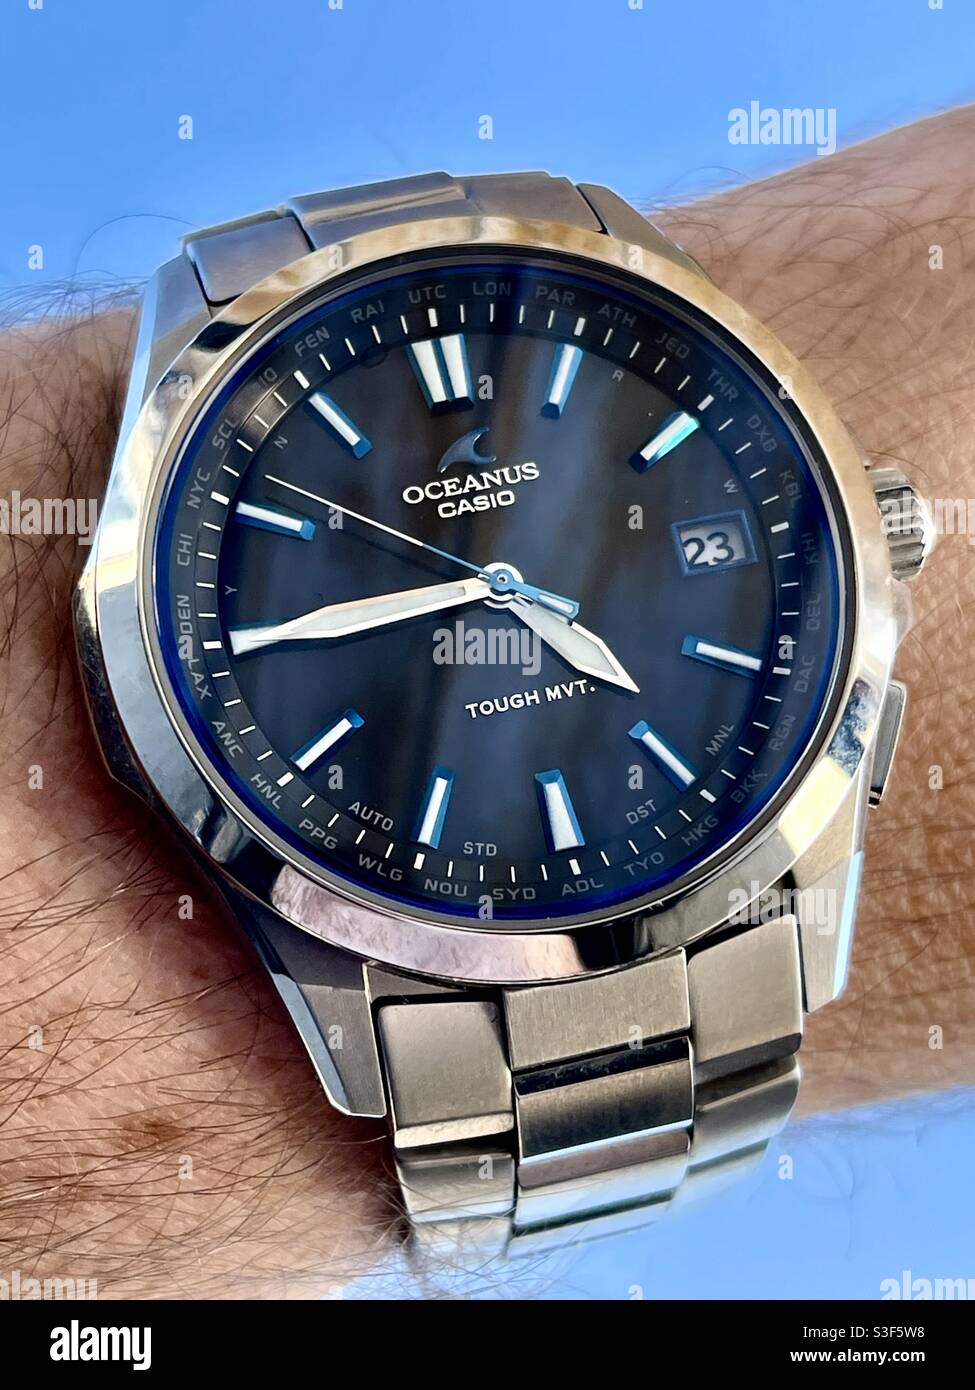 Casio Oceanus S100 solar atomic titanium wrist watch with black dial,  polished Chrome bezel and blue accents on a blue sky Stock Photo - Alamy